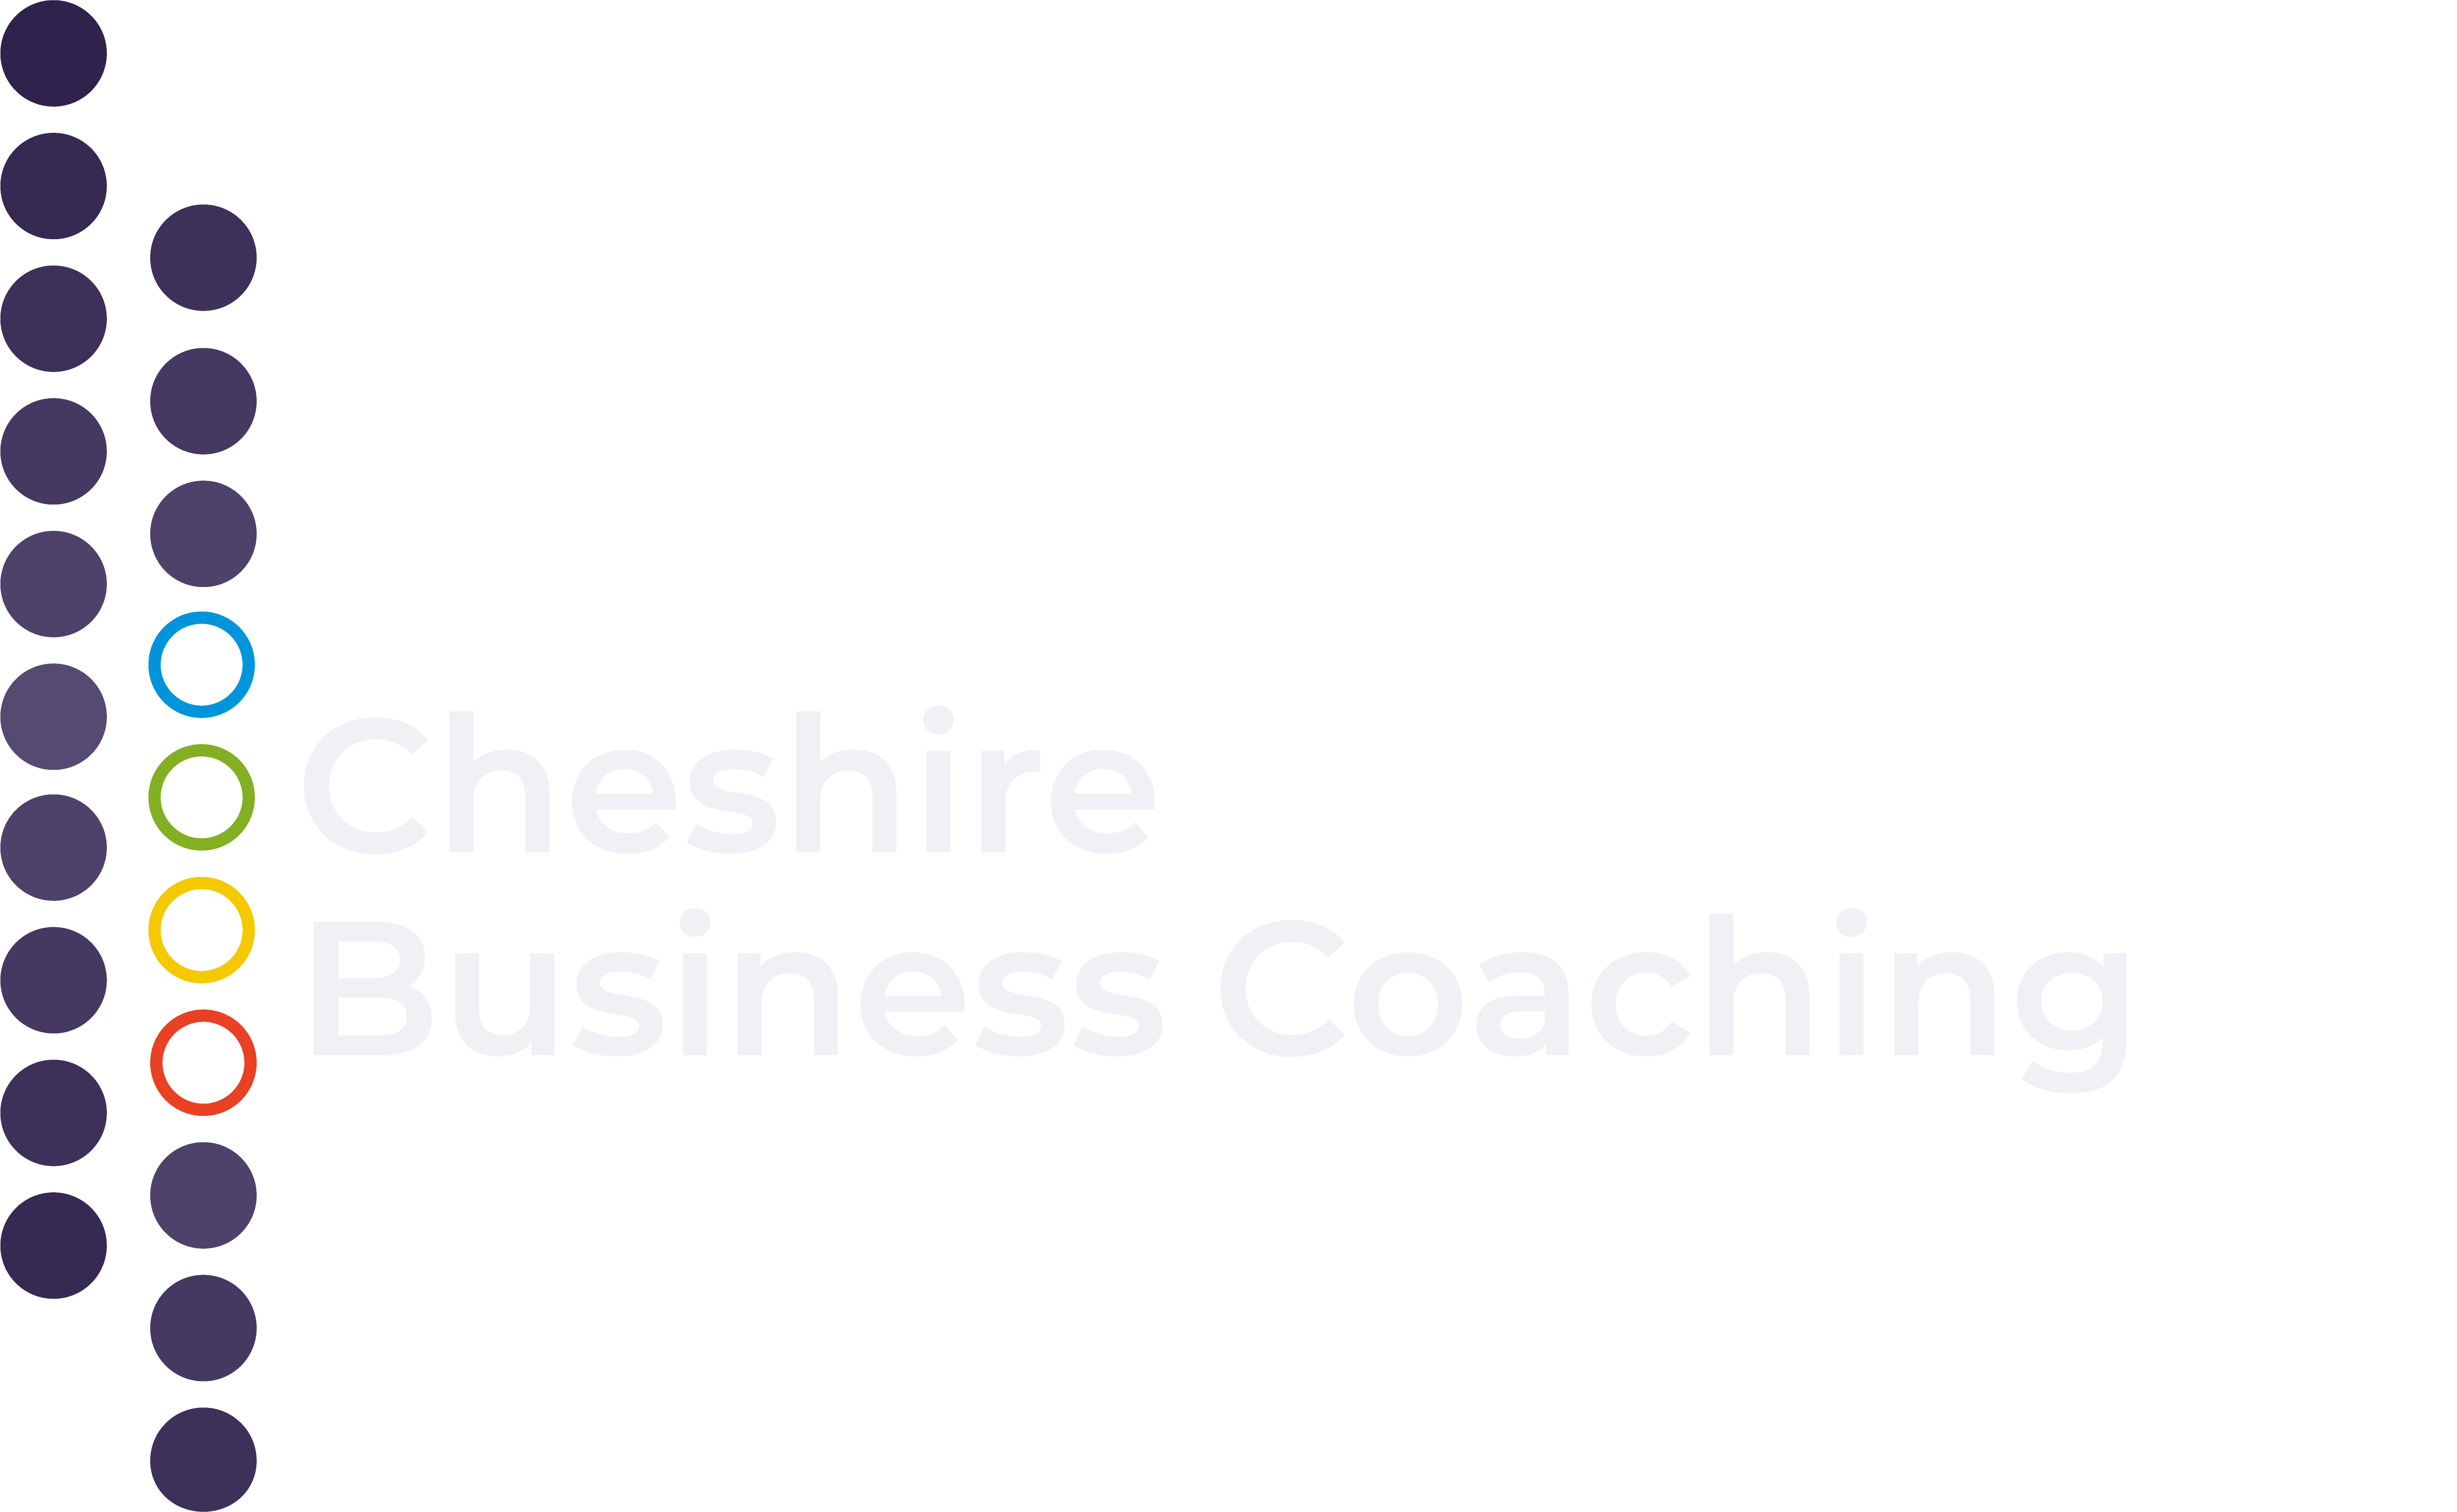 Cheshire Business Coaching - Business Coaching and Mentoring